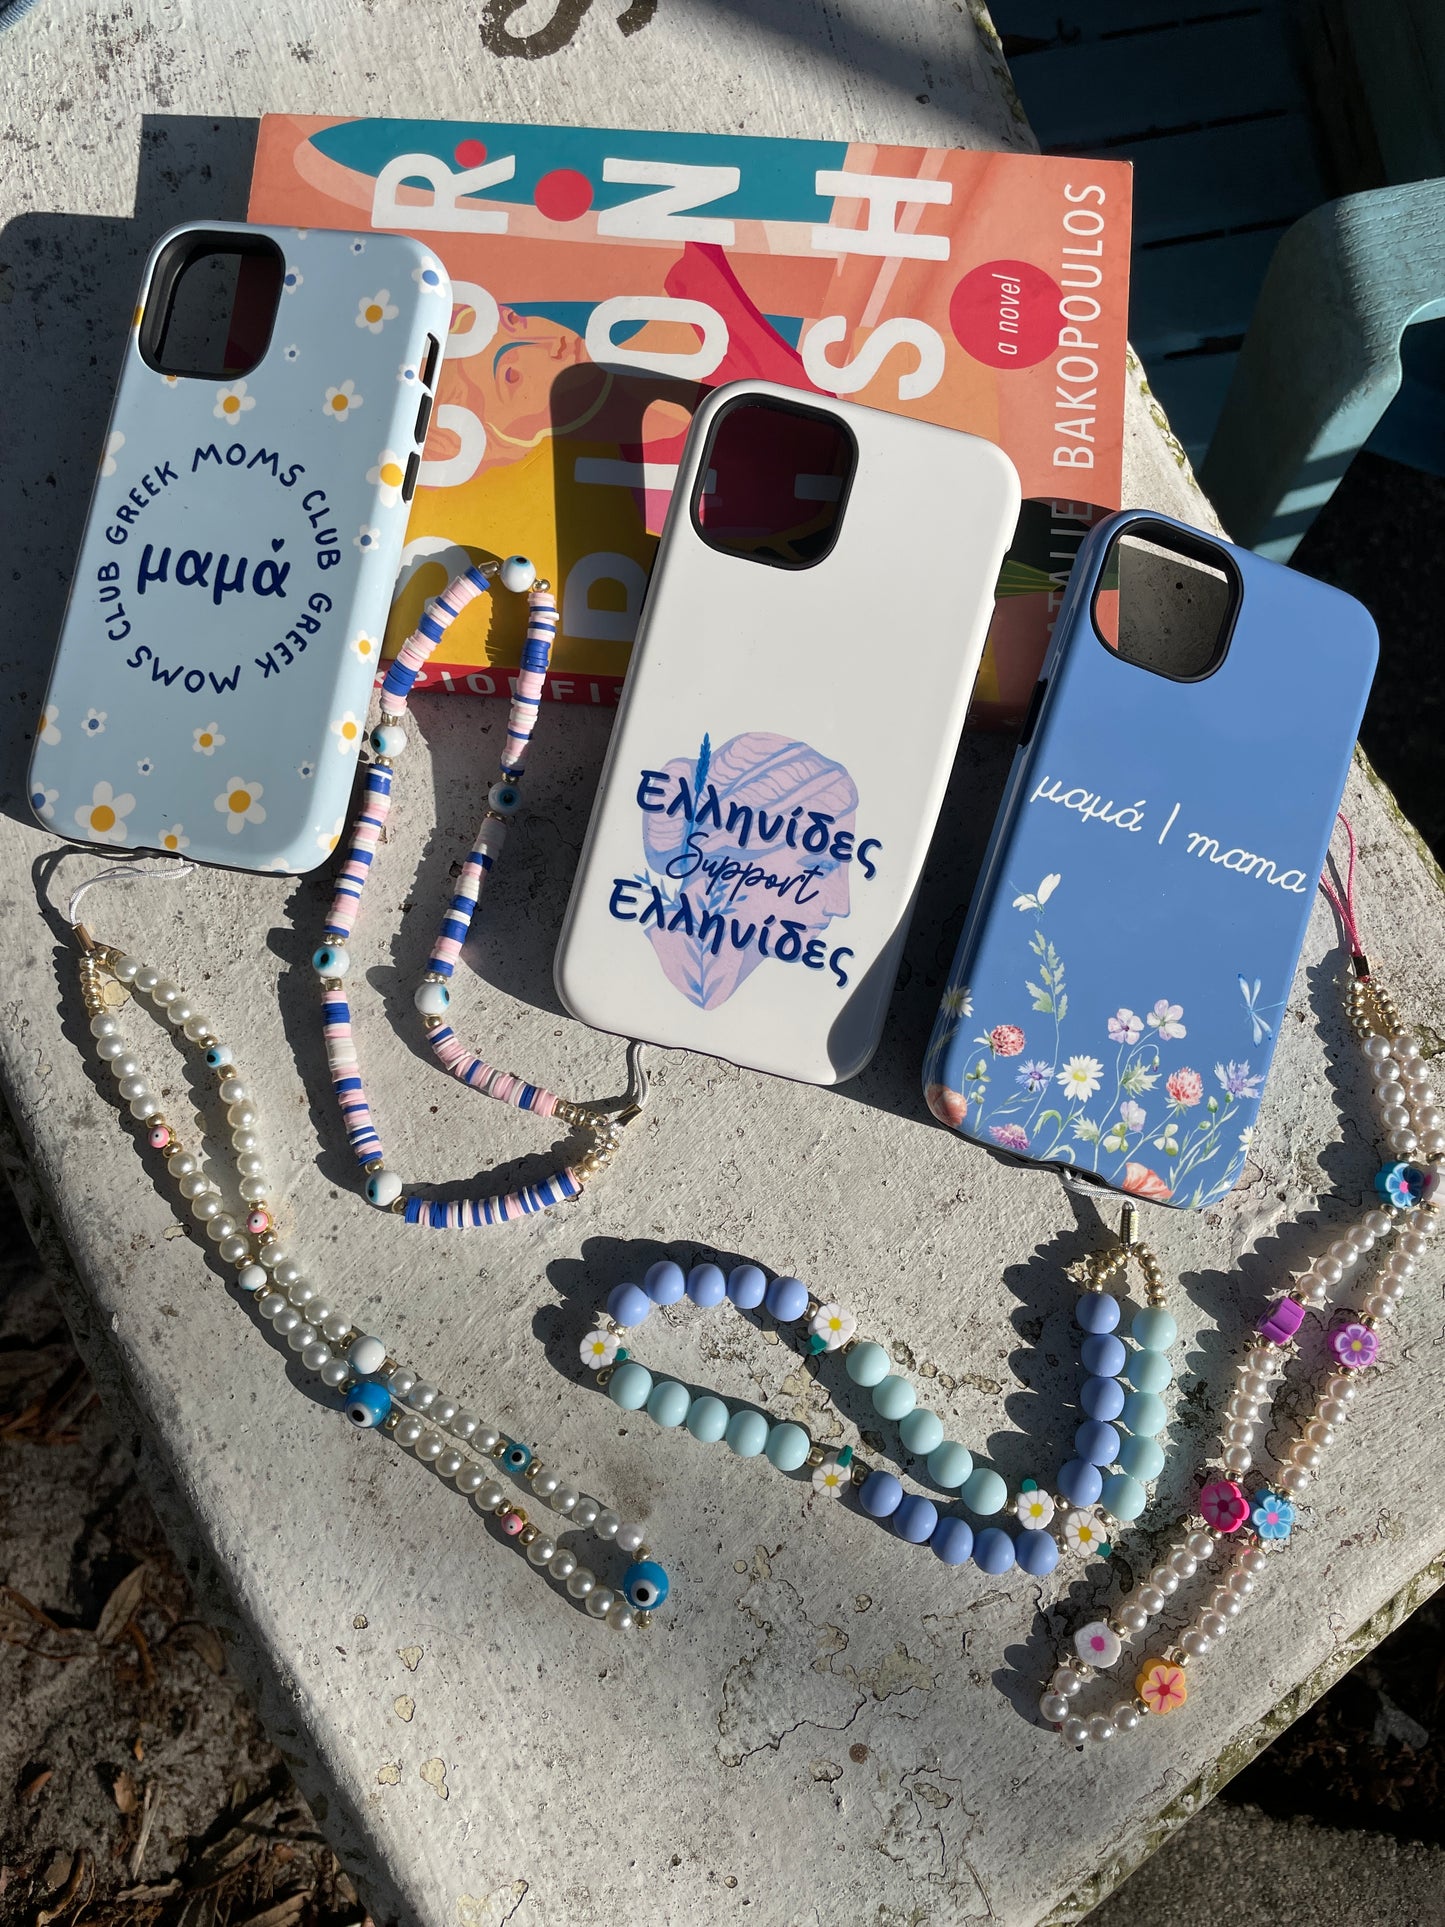 Phone Charms for Iphone/Samsung